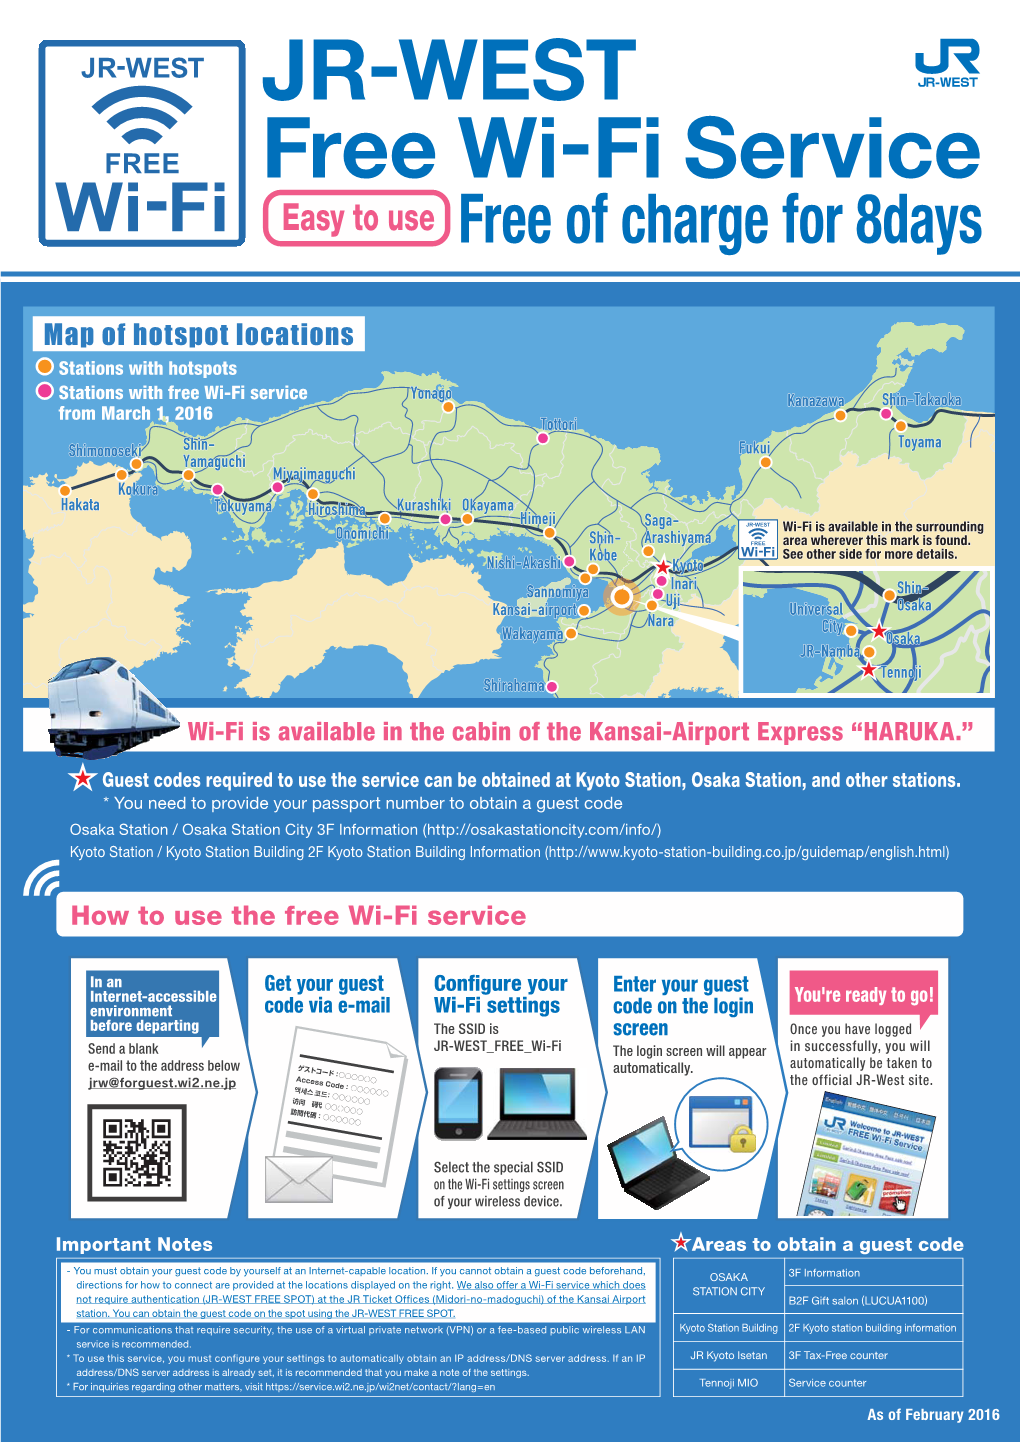 JR-WEST Free Wi-Fi Service Easy to Use Free of Charge for 8Days